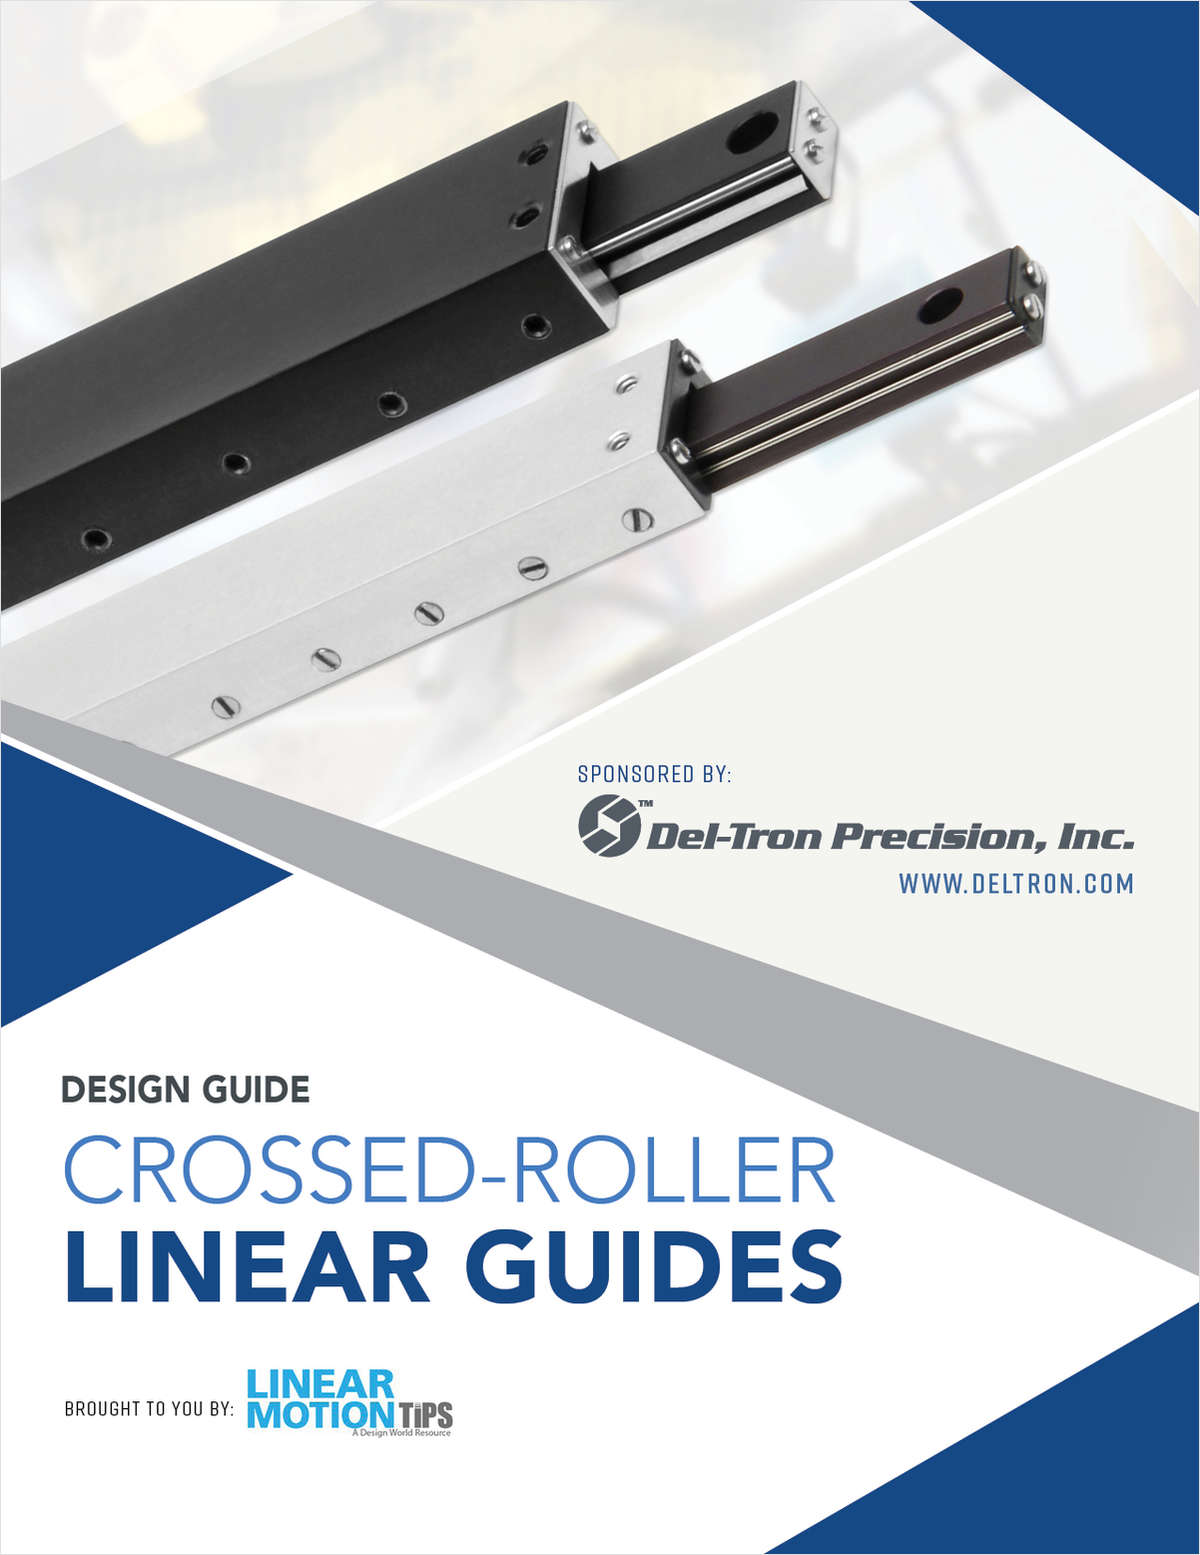 Design Guide: Crossed-Roller Linear Guides